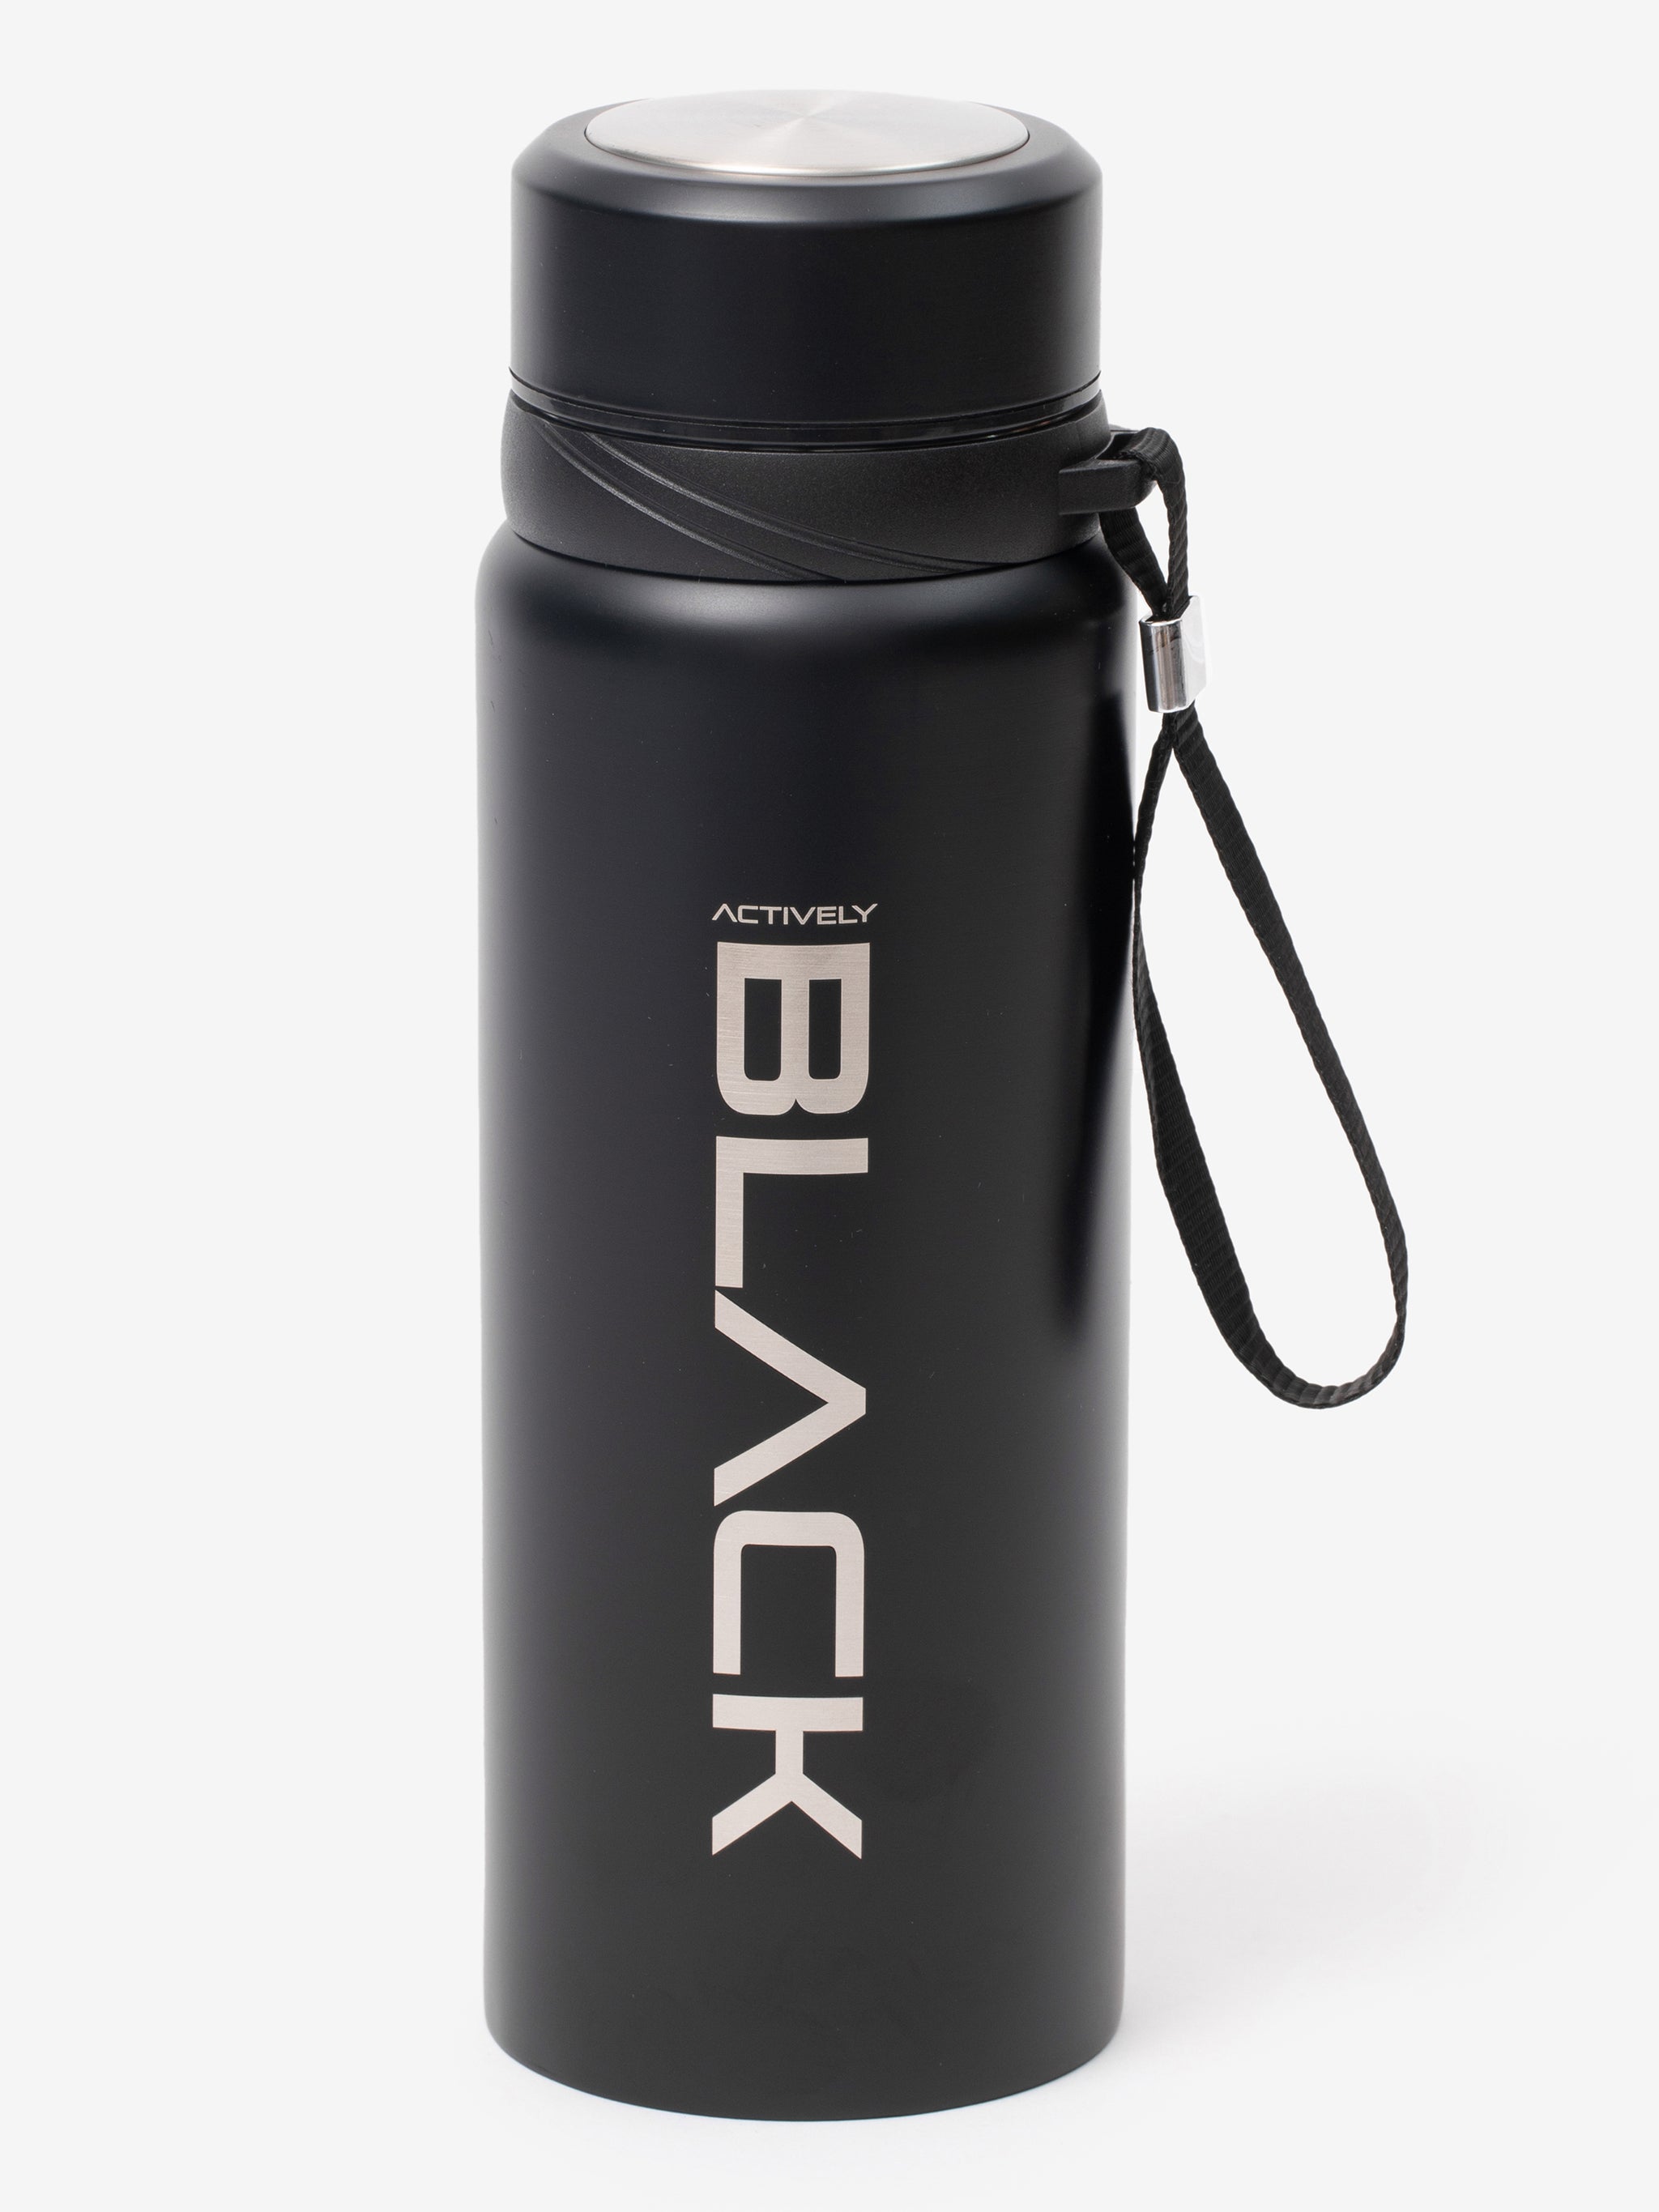 Sports Stainless Steel Insulated Water Bottle 26 oz Black&Navy, Black